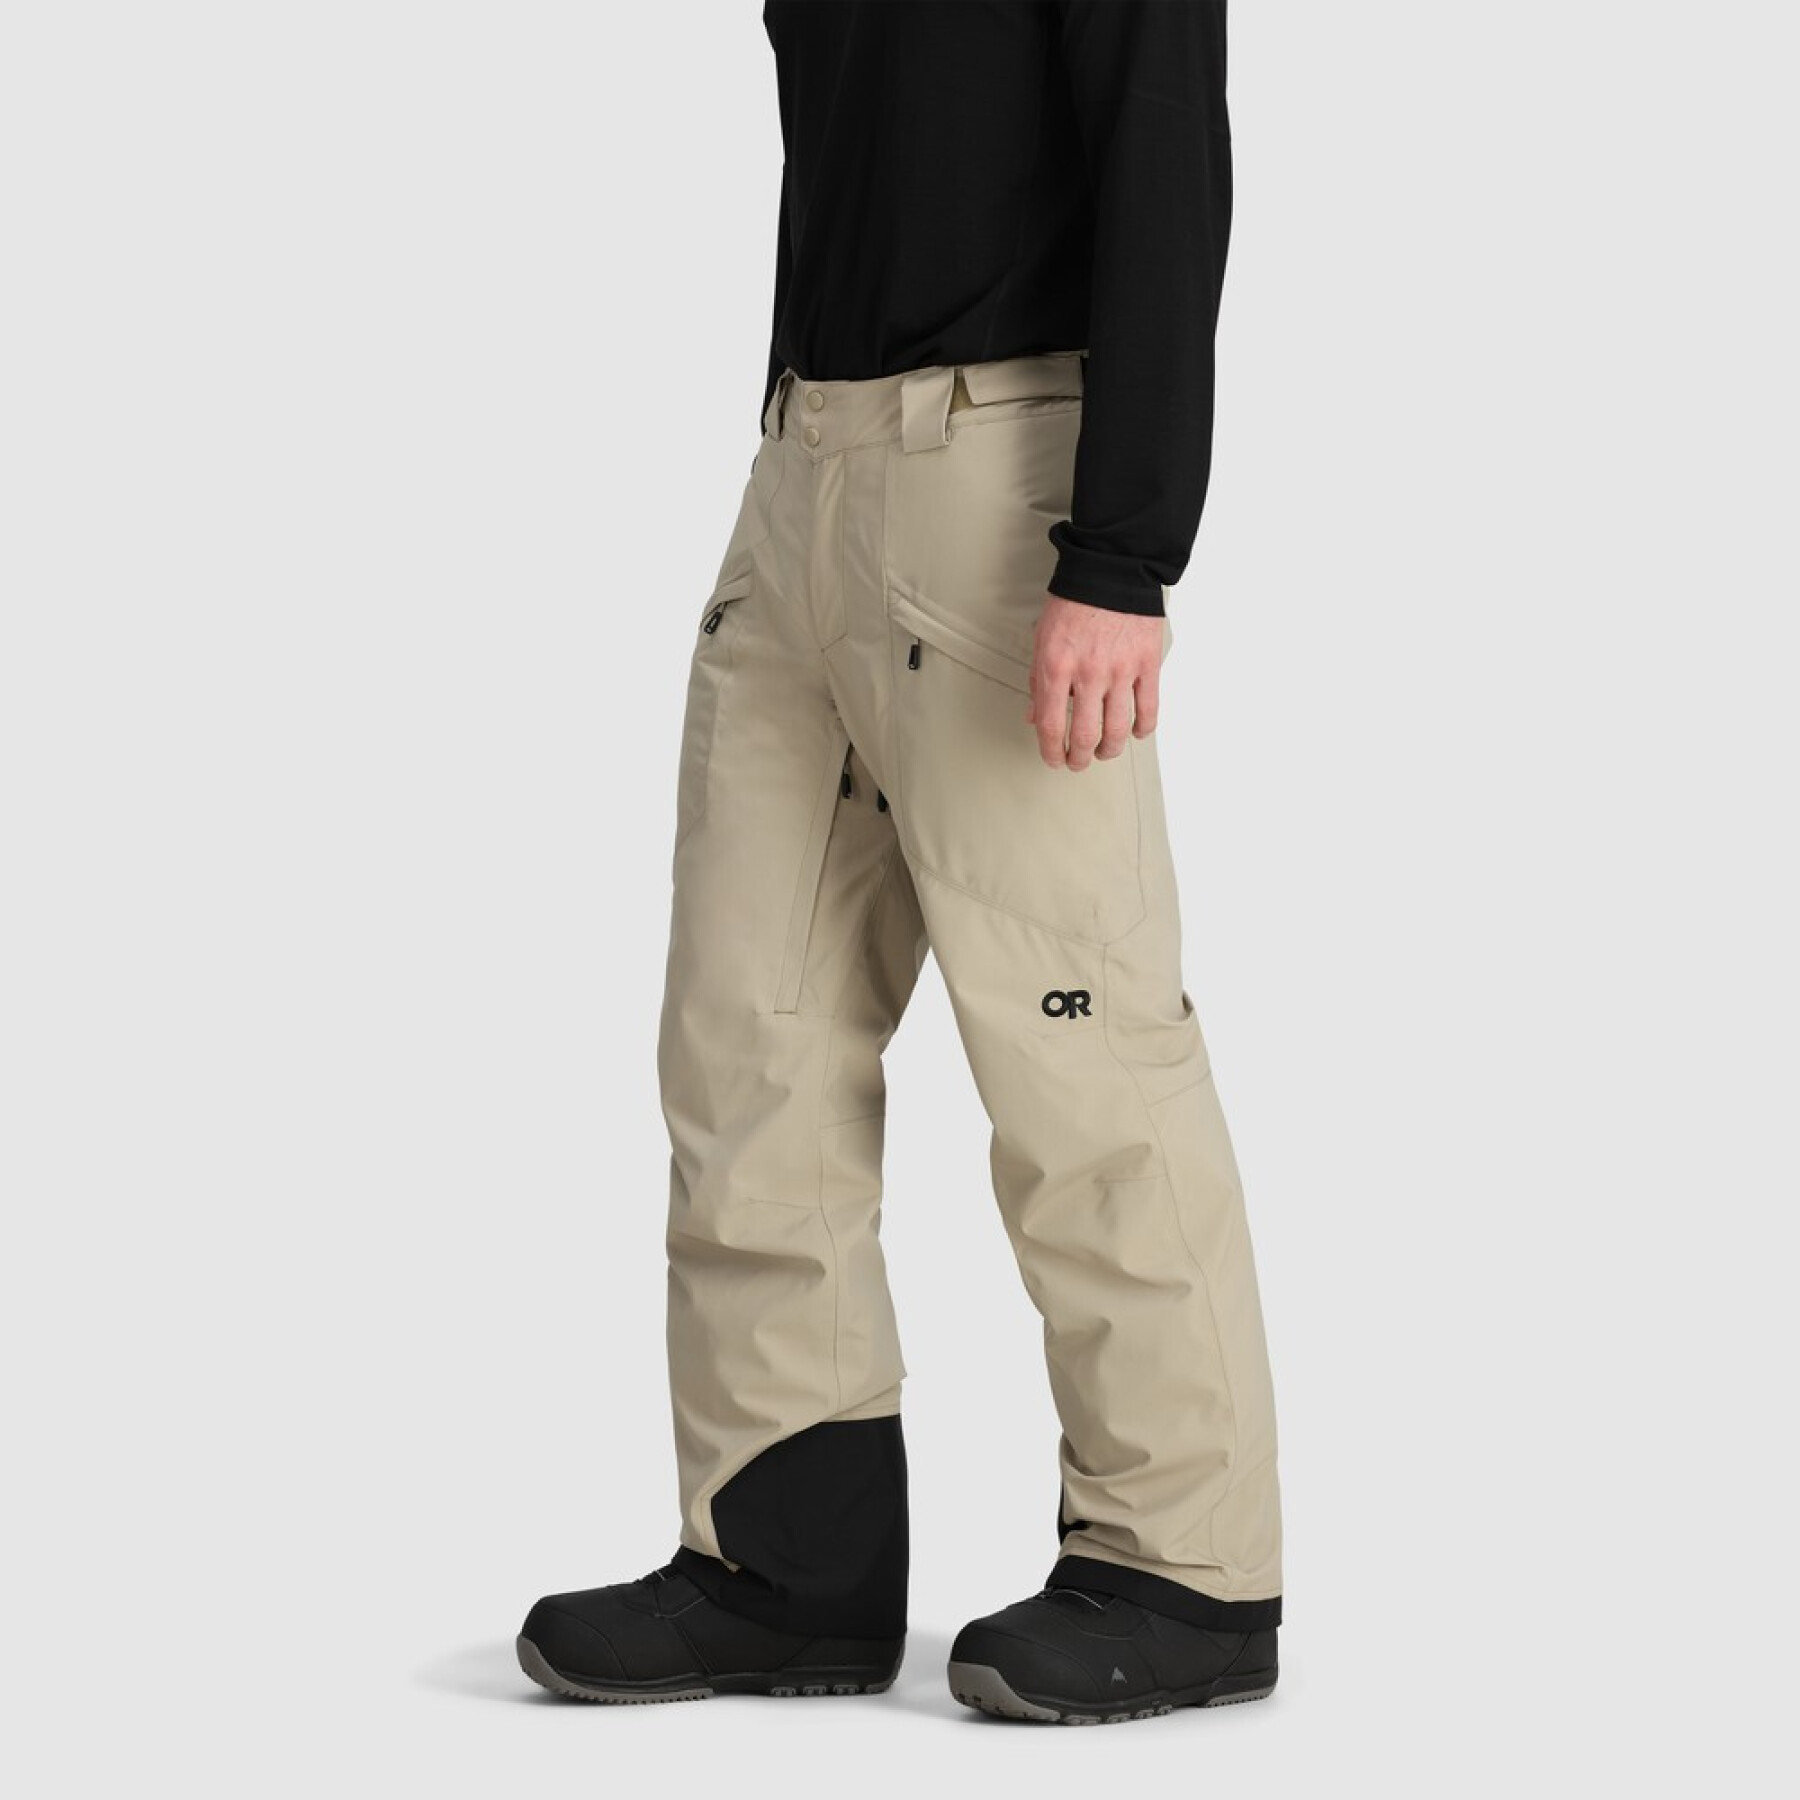 Skihose Outdoor Research Snowcrew